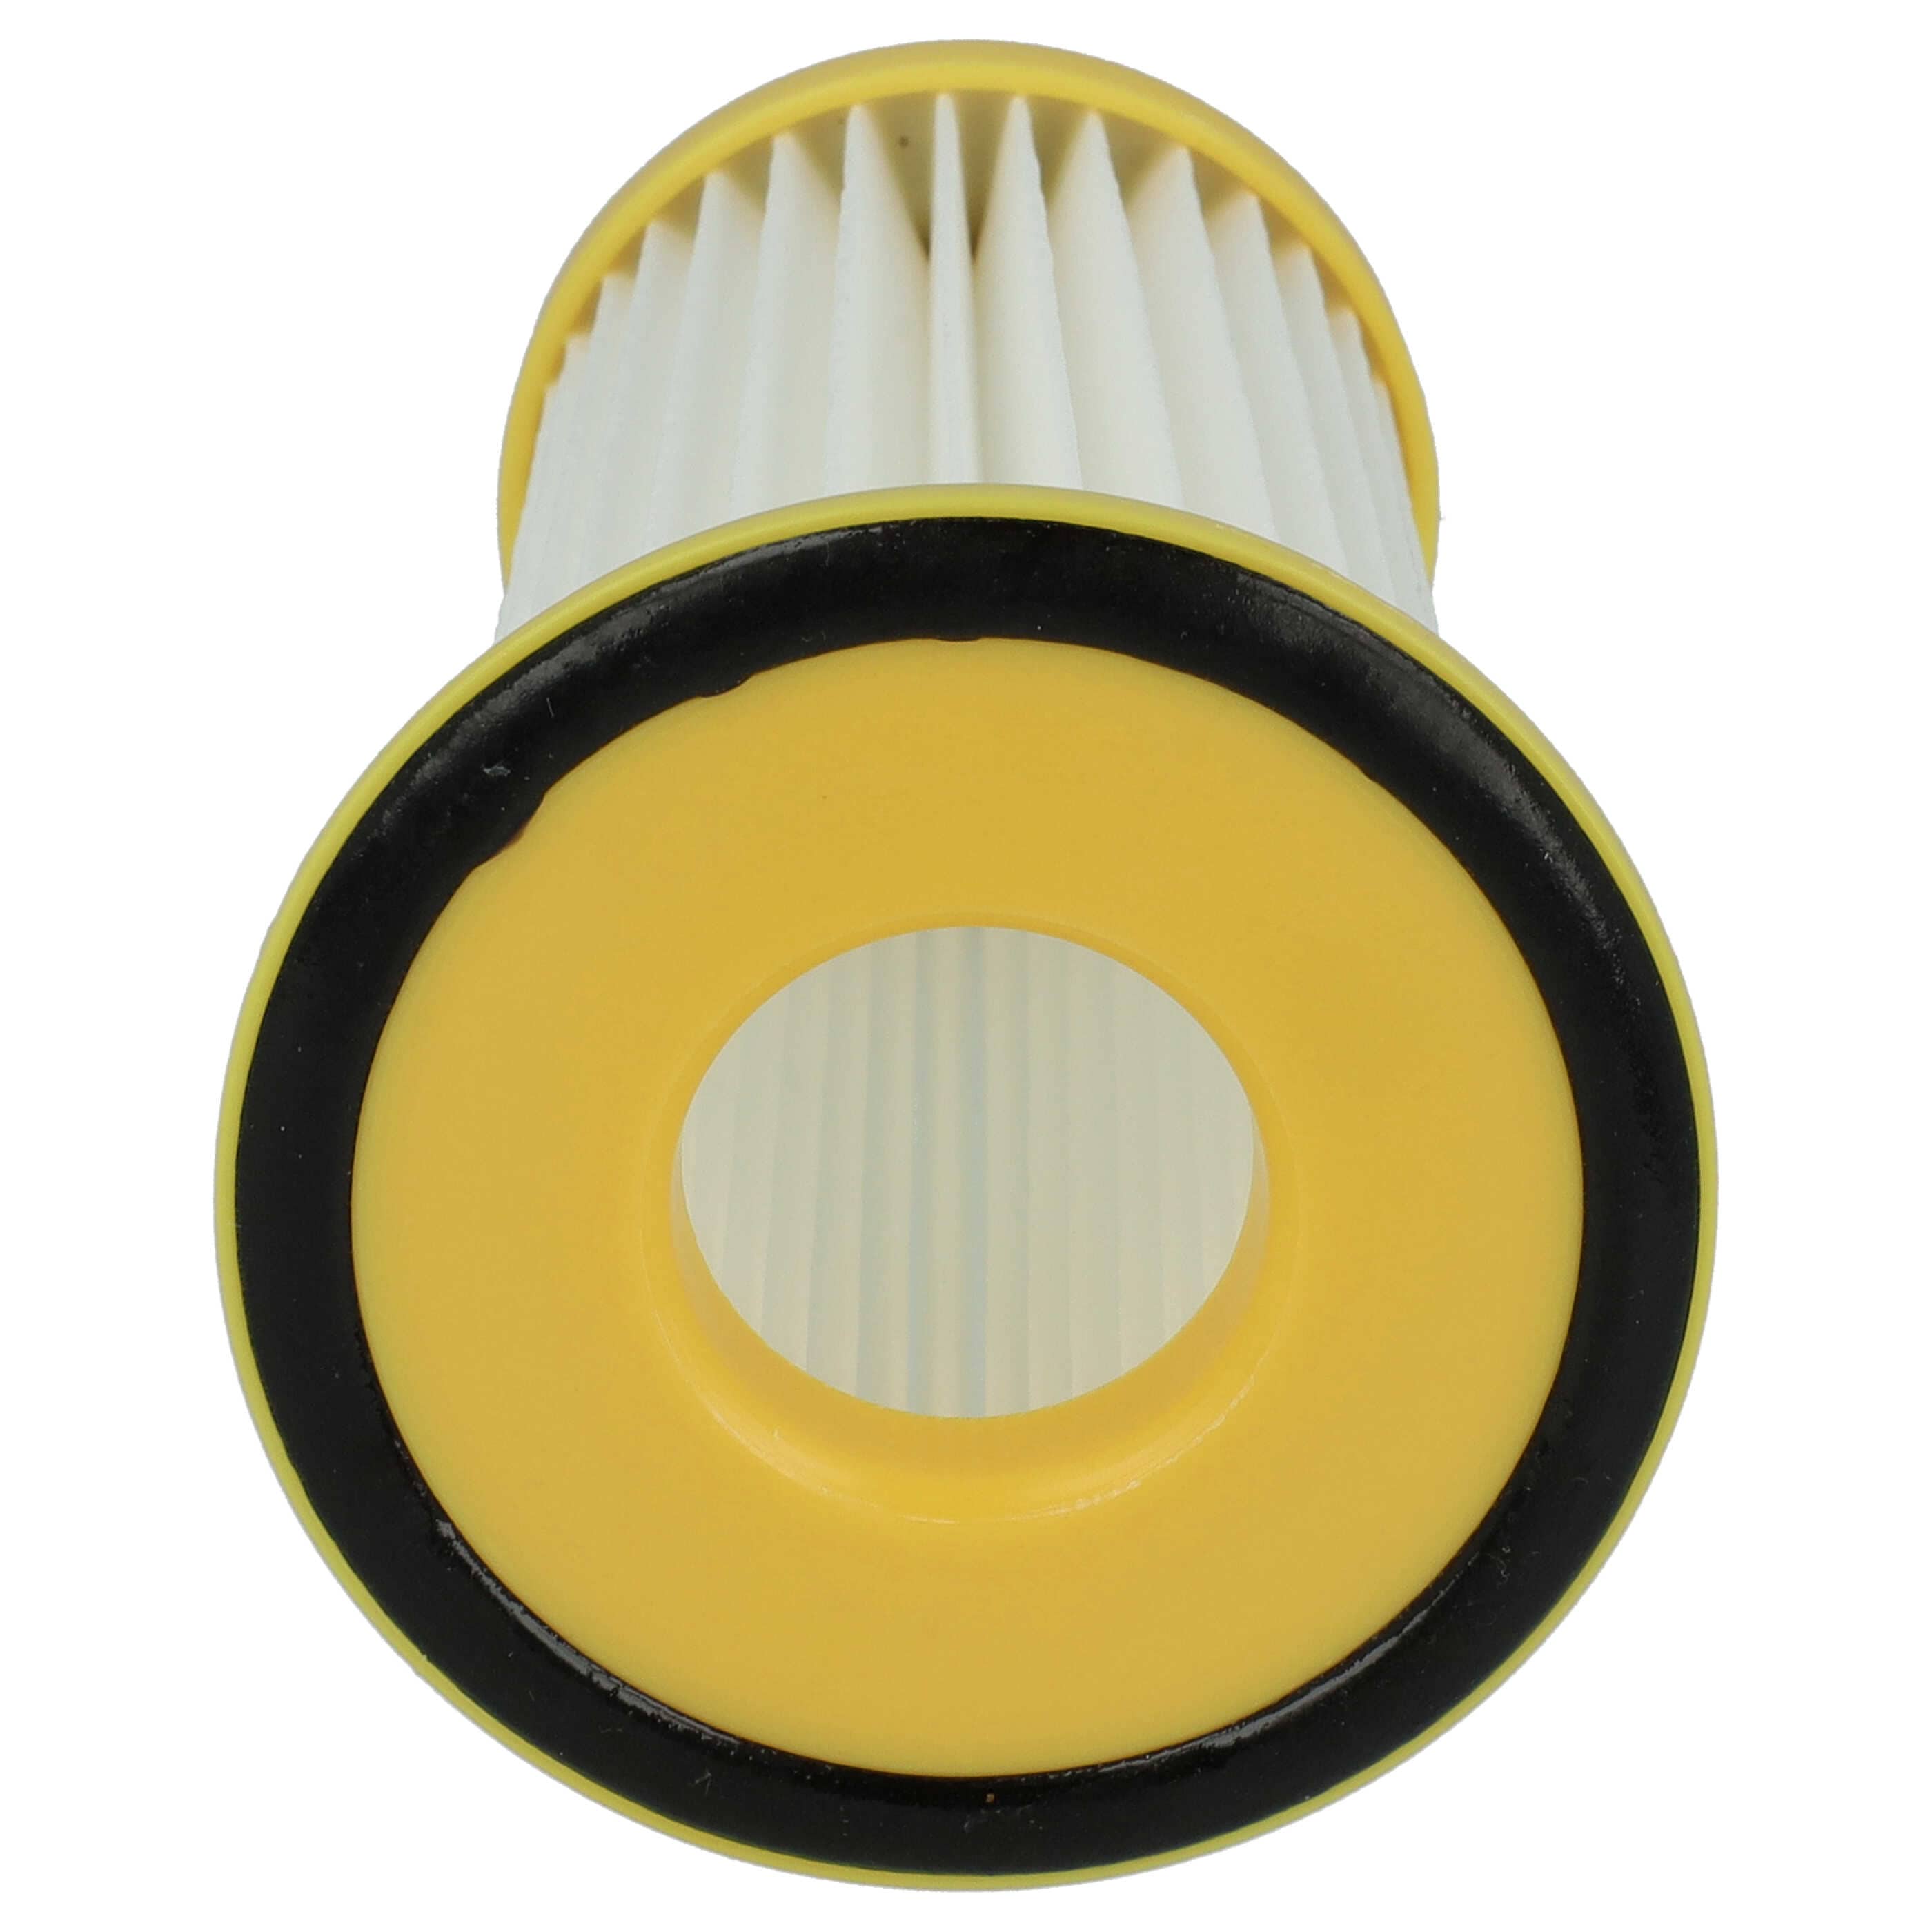 1x cartridge filter replaces Philips 432200520850 for Philips Vacuum Cleaner, white / yellow